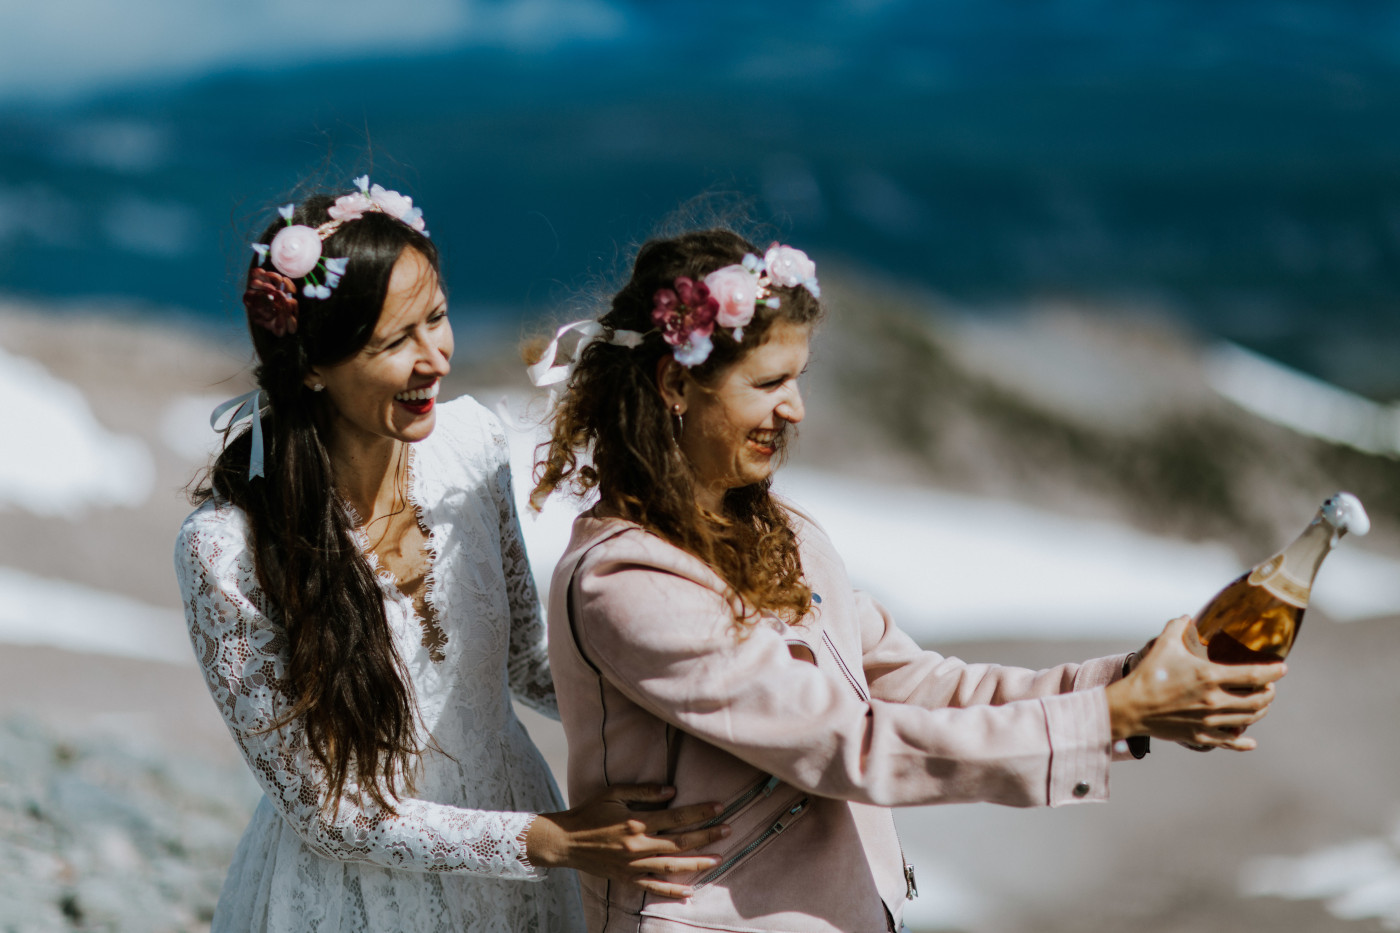 Margaux and Heather popping a bottle of champagne. Elopement photography at Mount Hood by Sienna Plus Josh.